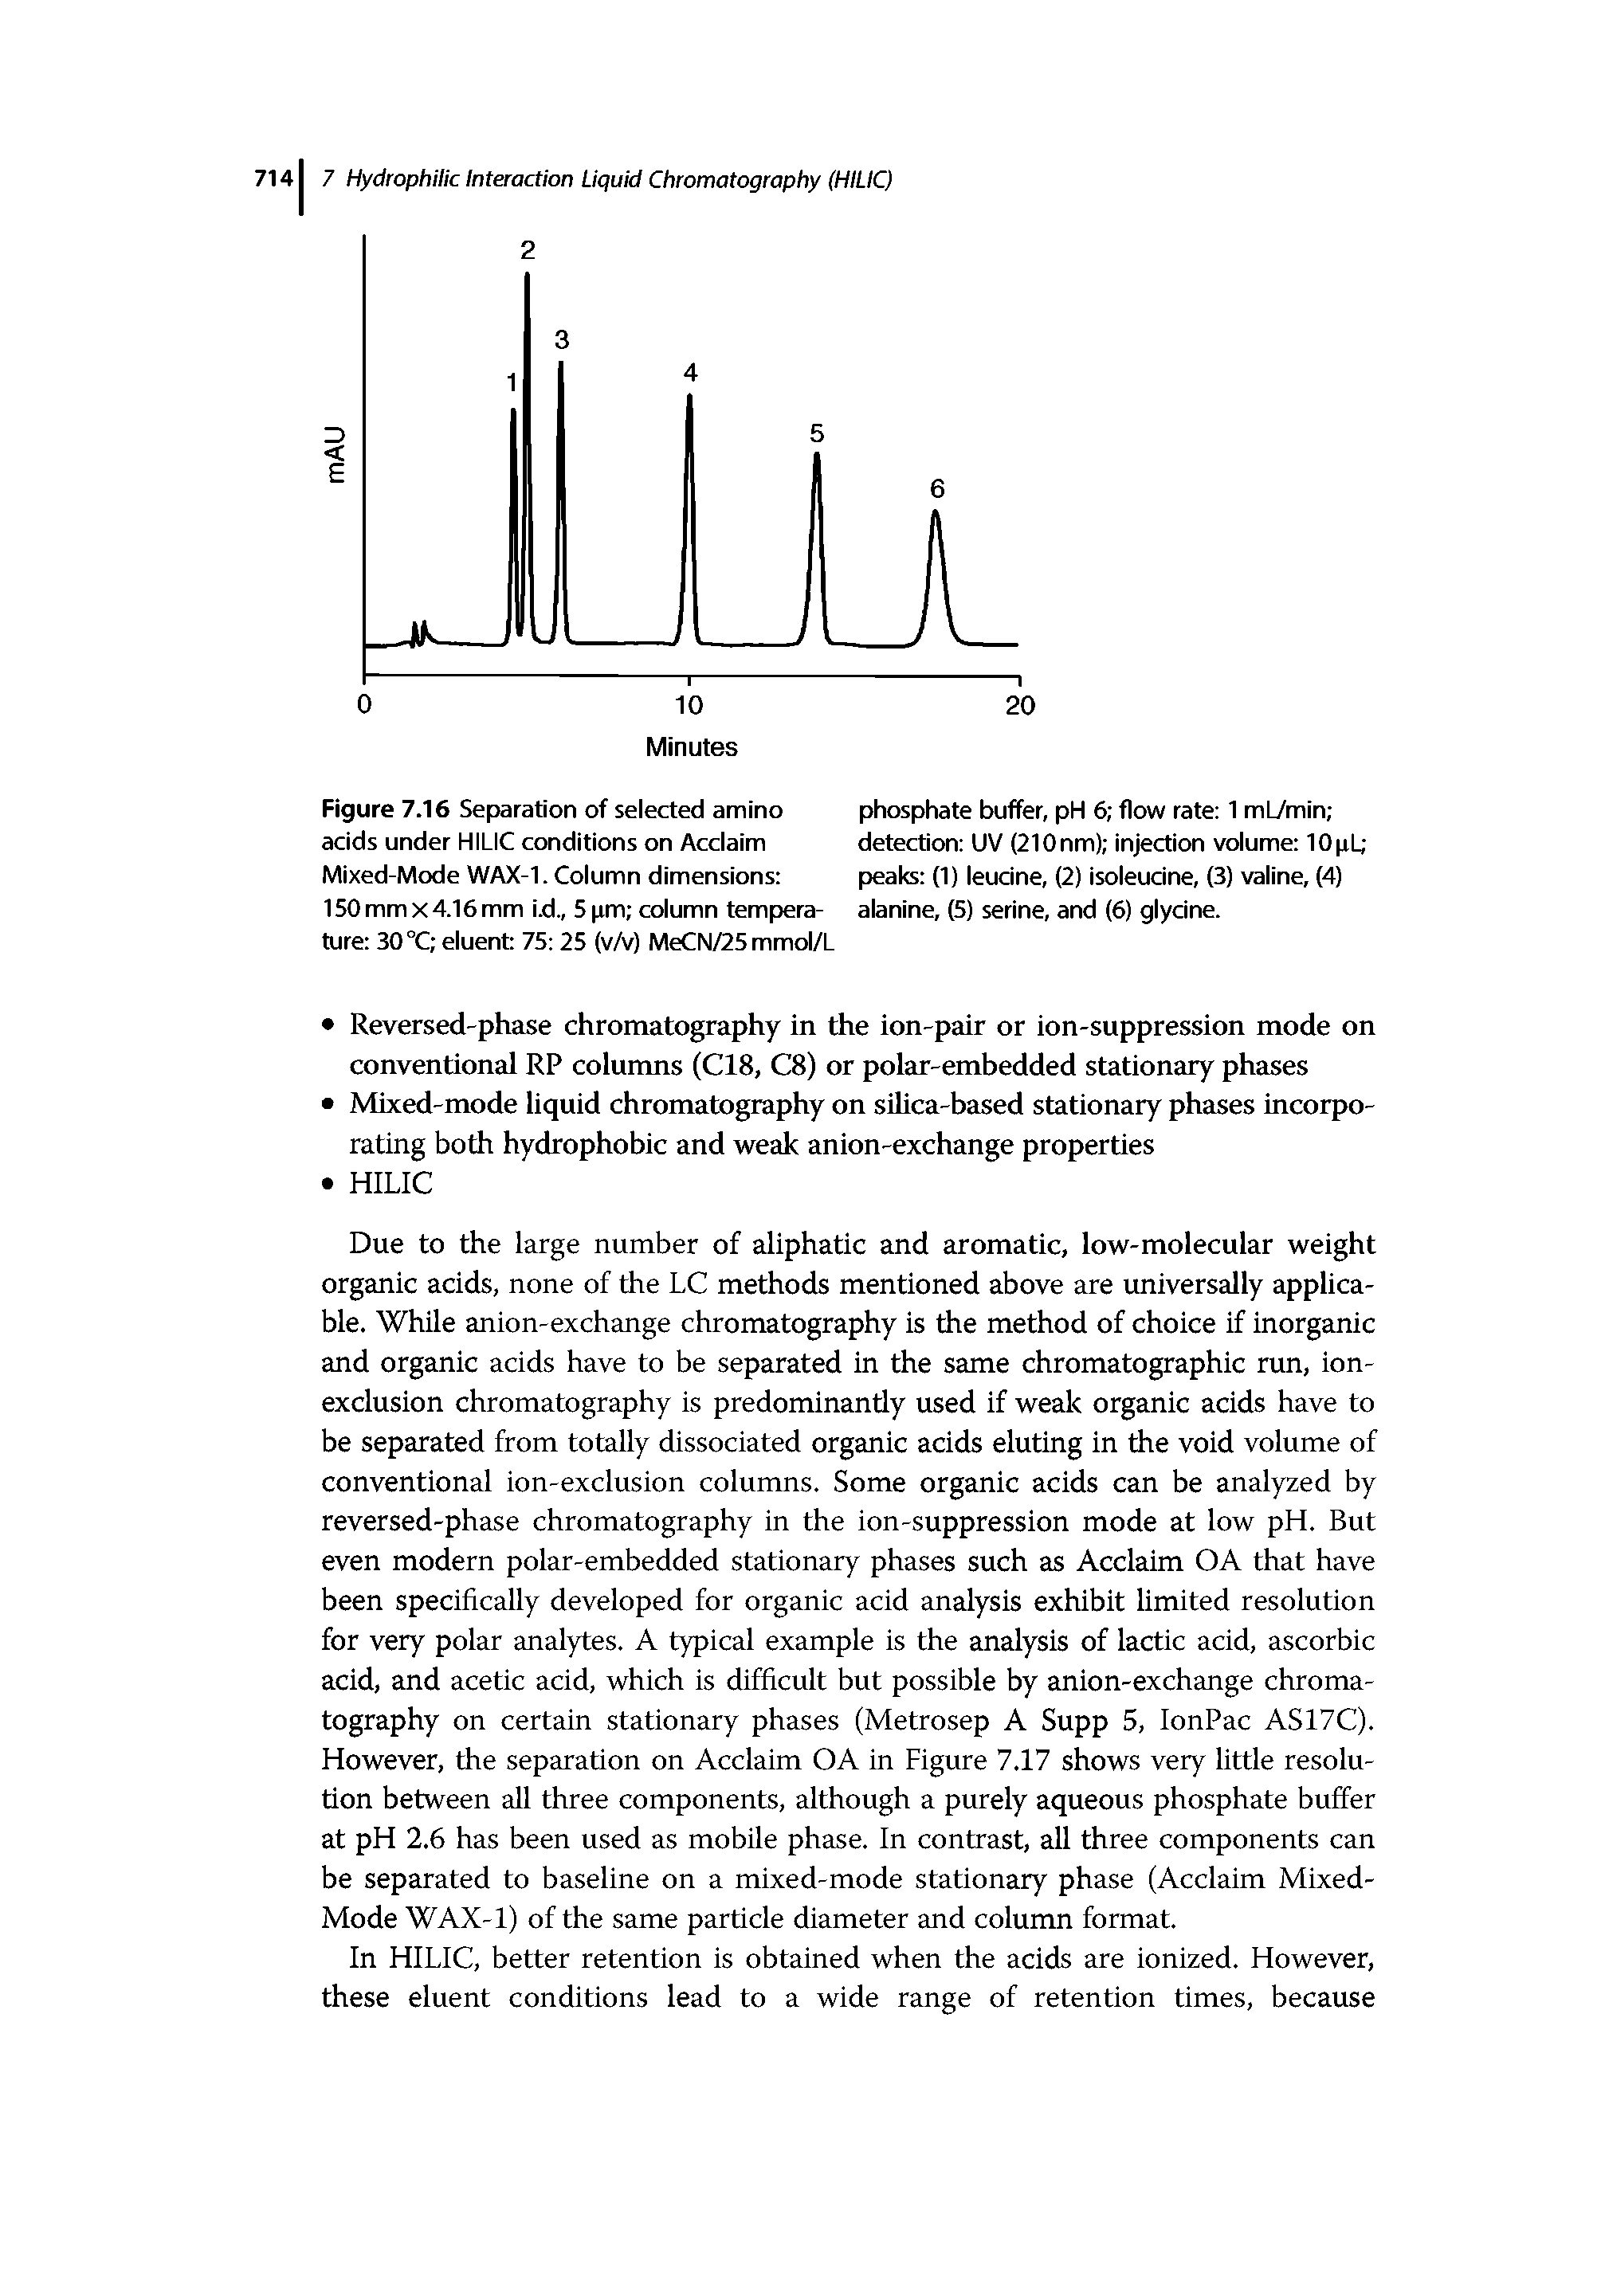 Figure 7.16 Separation of selected amino acids under HILIC conditions on Acclaim Mixed-Mode WAX-1. Column dimensions 150mmx4.16mm i.d., 5pm column temperature 30 °C eluent 75 25 (vAr) MeCN/25mmol/L...